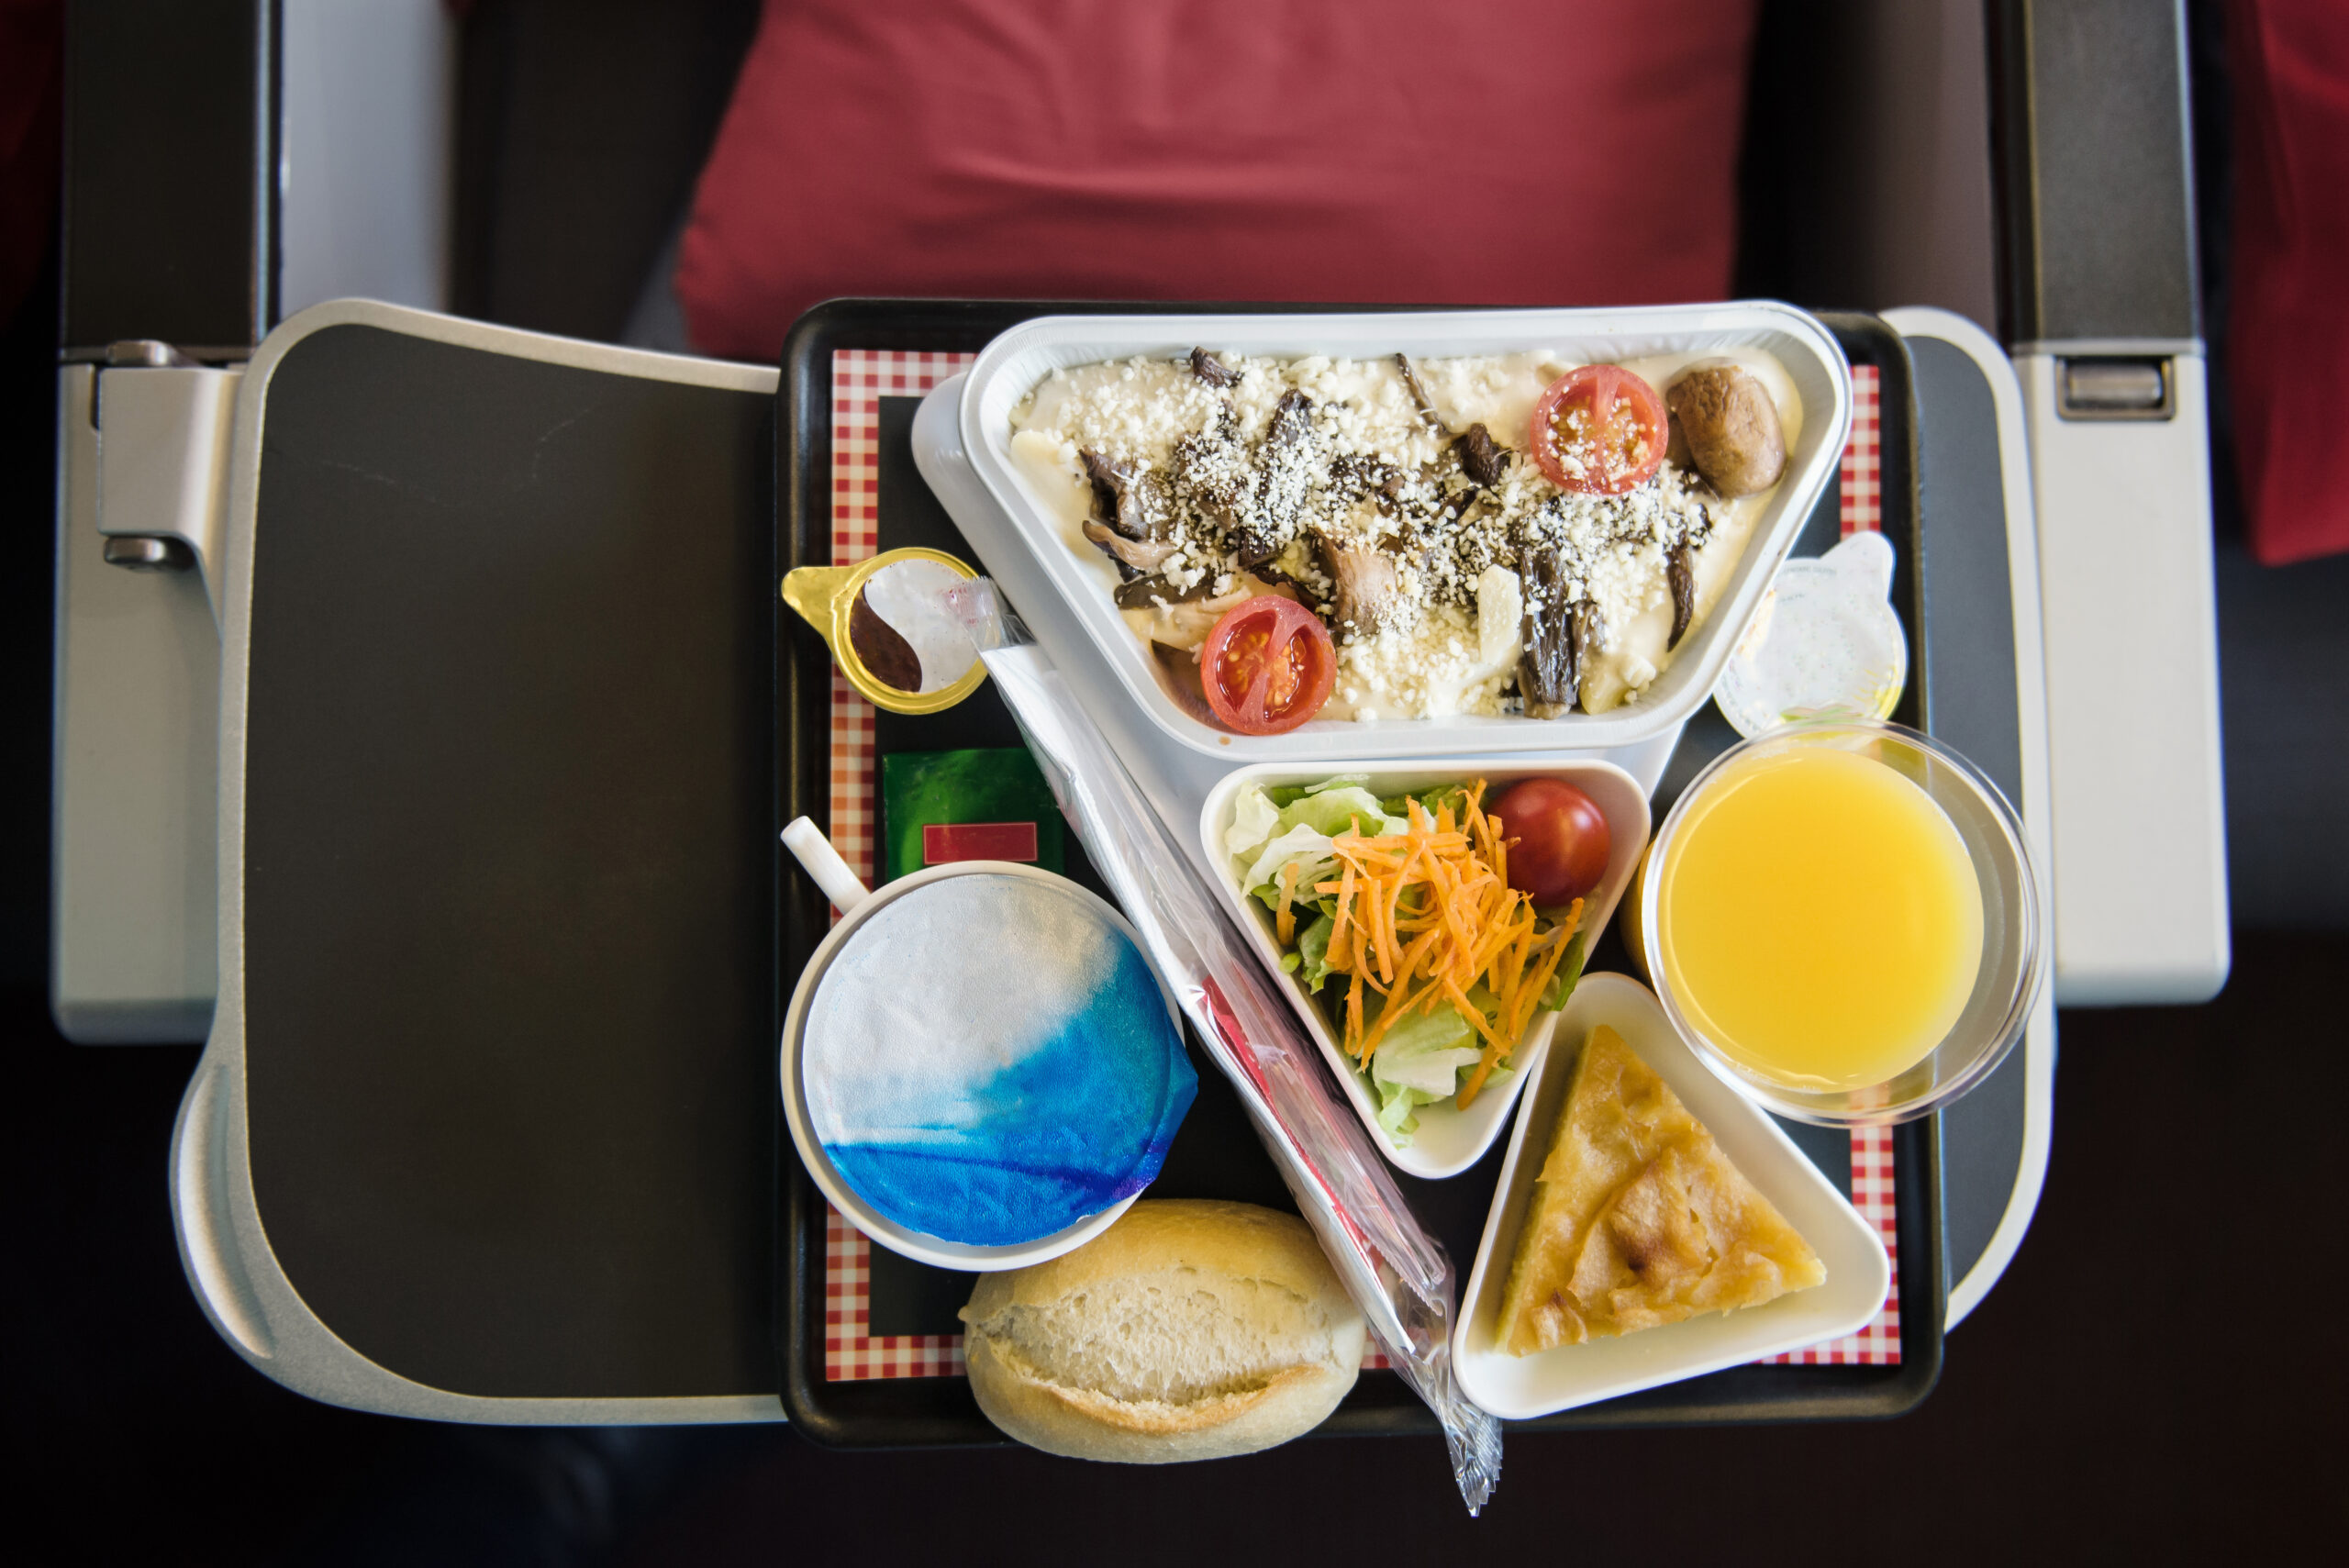 Food served in sustainable serviceware for airlines | RMT Global Partners